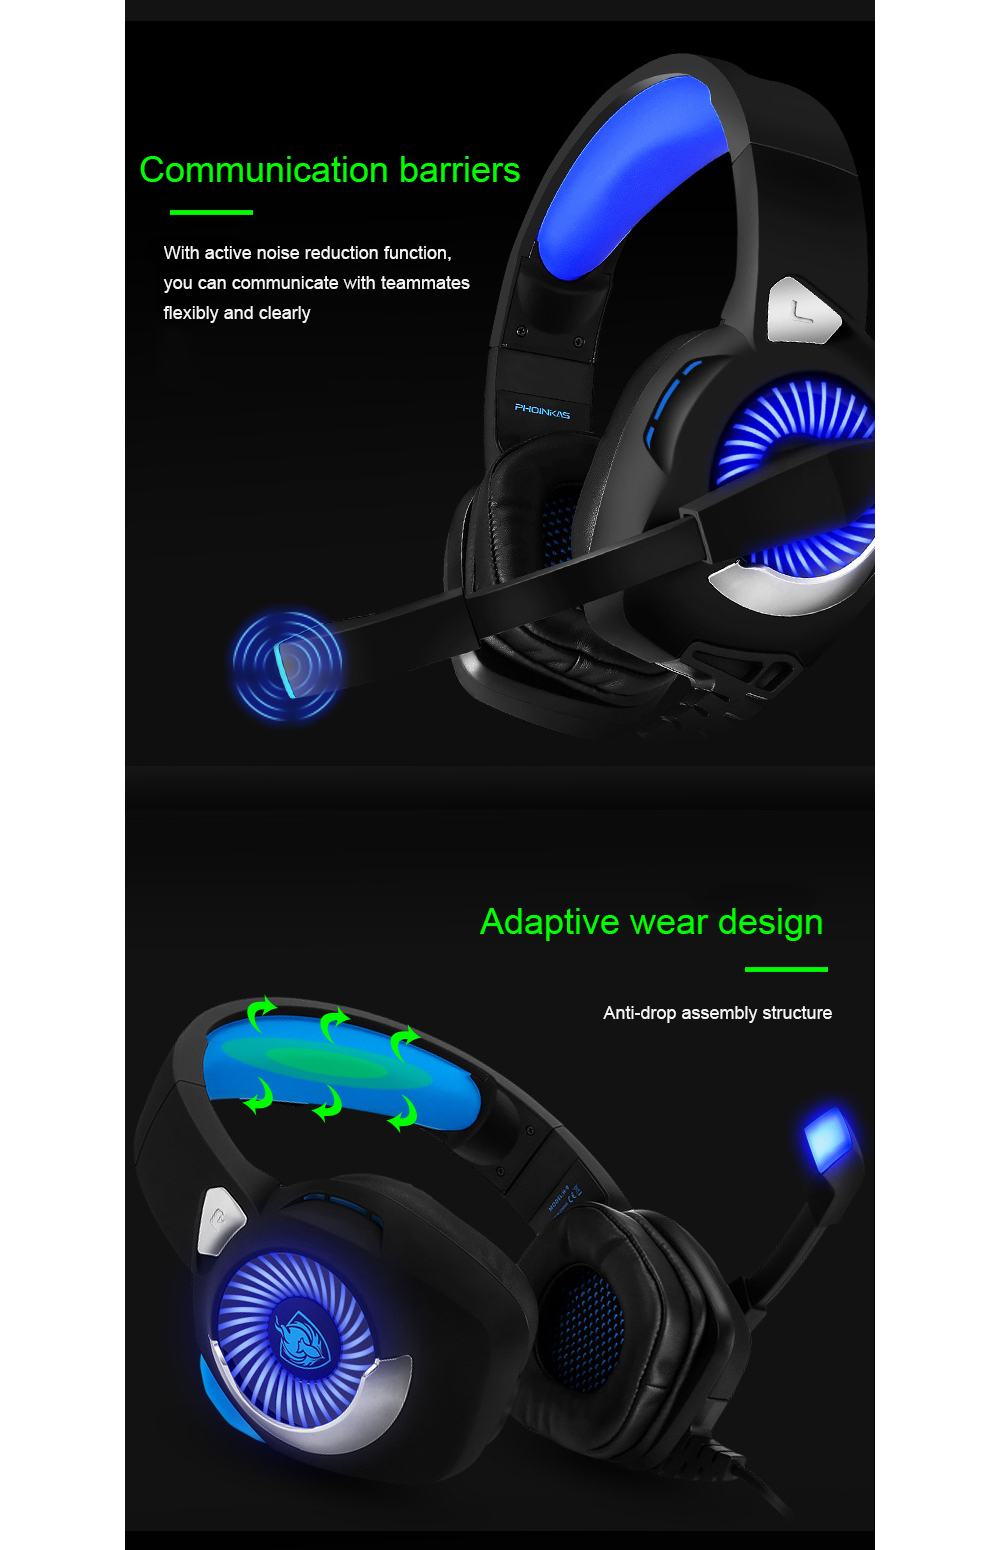 PHOINIKAS-H-9-Gaming-Headset-50mm-Drive-Unit-120deg-Rotating-Microphone-Noise-Reduction-Protein-Leat-1755235-4